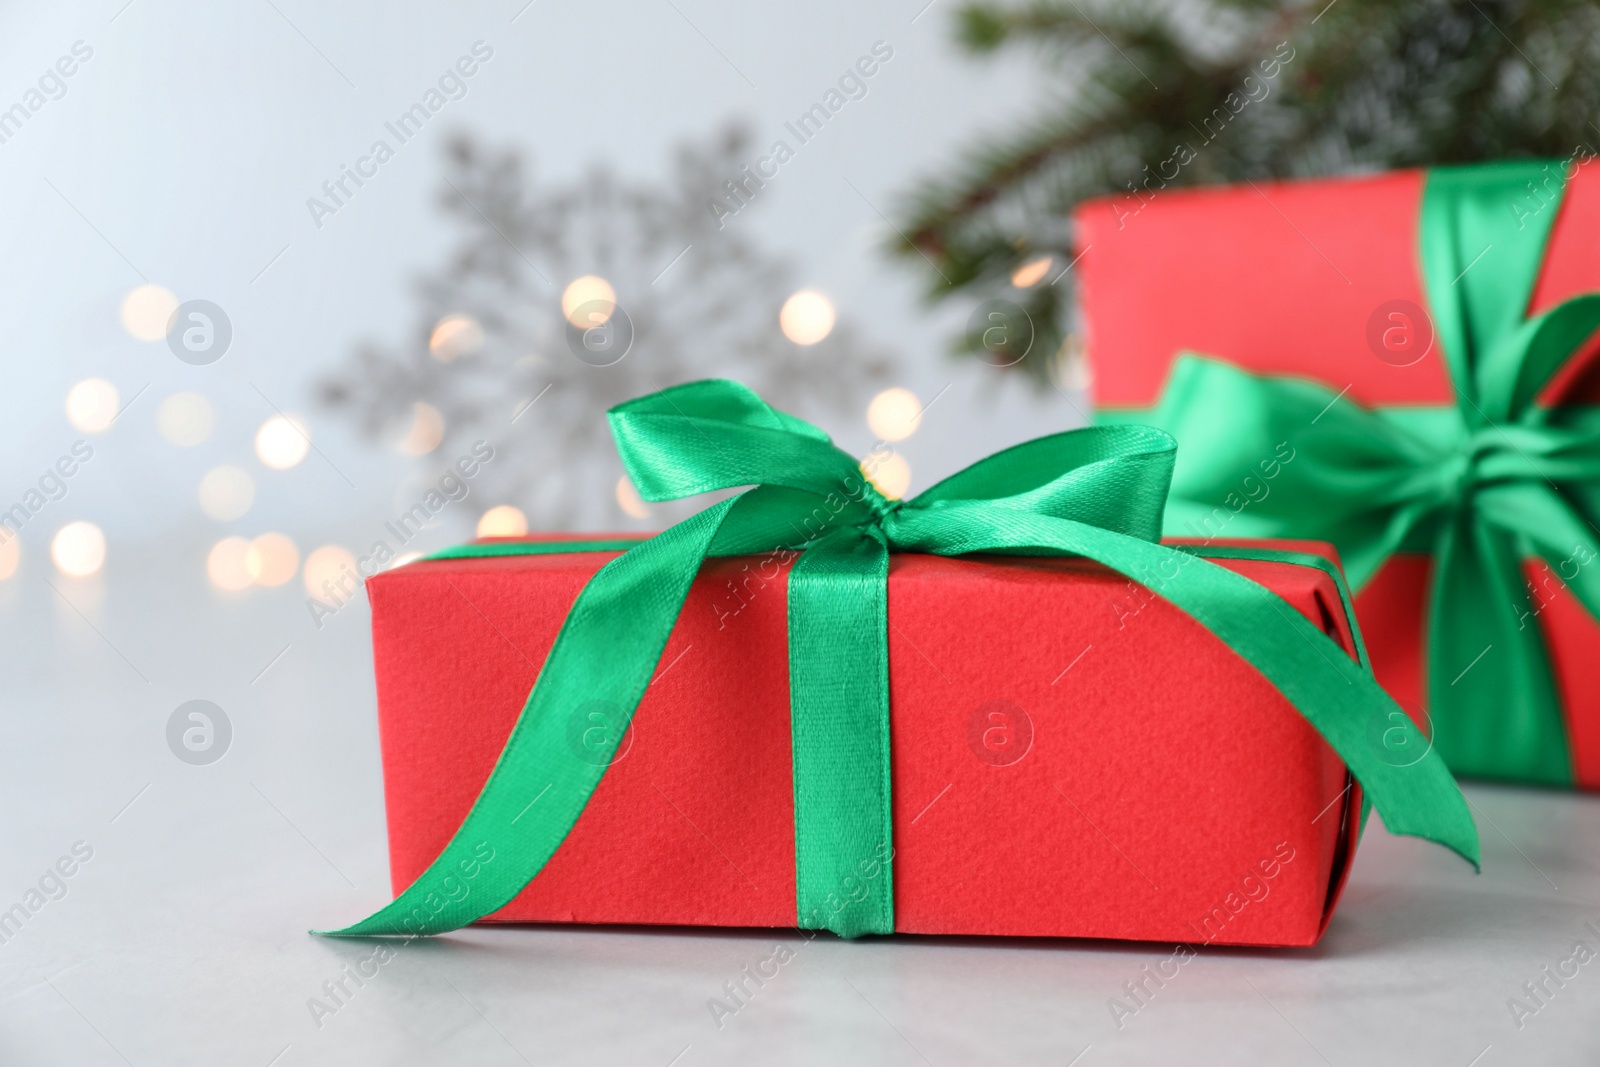 Photo of Christmas gift box with green bow against blurred lights, closeup